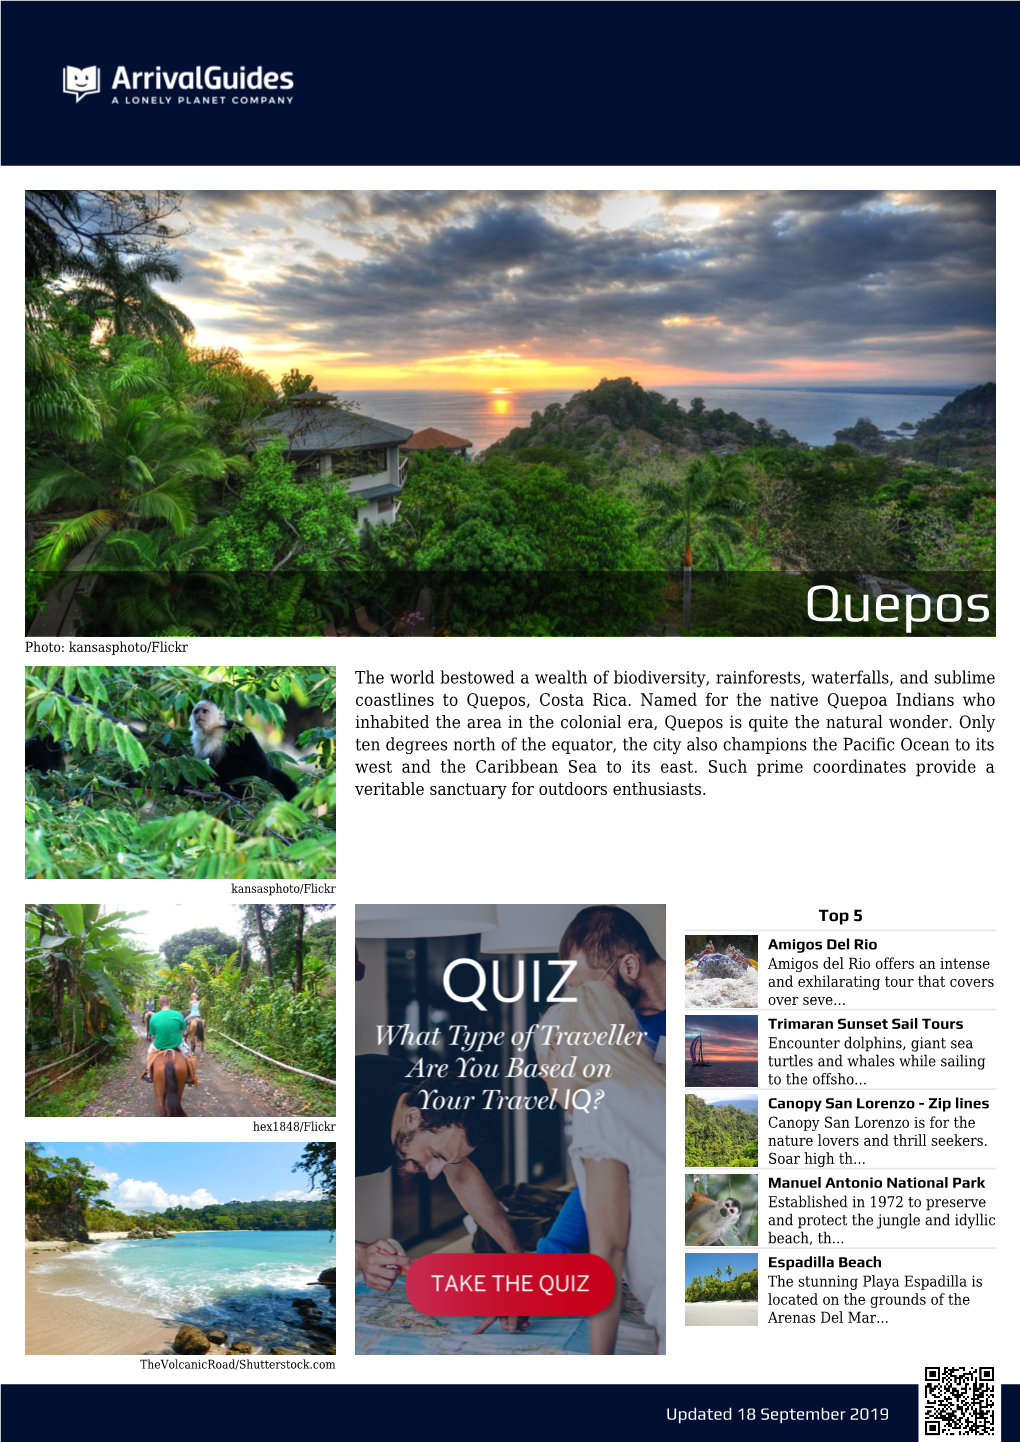 Quepos Photo: Kansasphoto/Flickr the World Bestowed a Wealth of Biodiversity, Rainforests, Waterfalls, and Sublime Coastlines to Quepos, Costa Rica